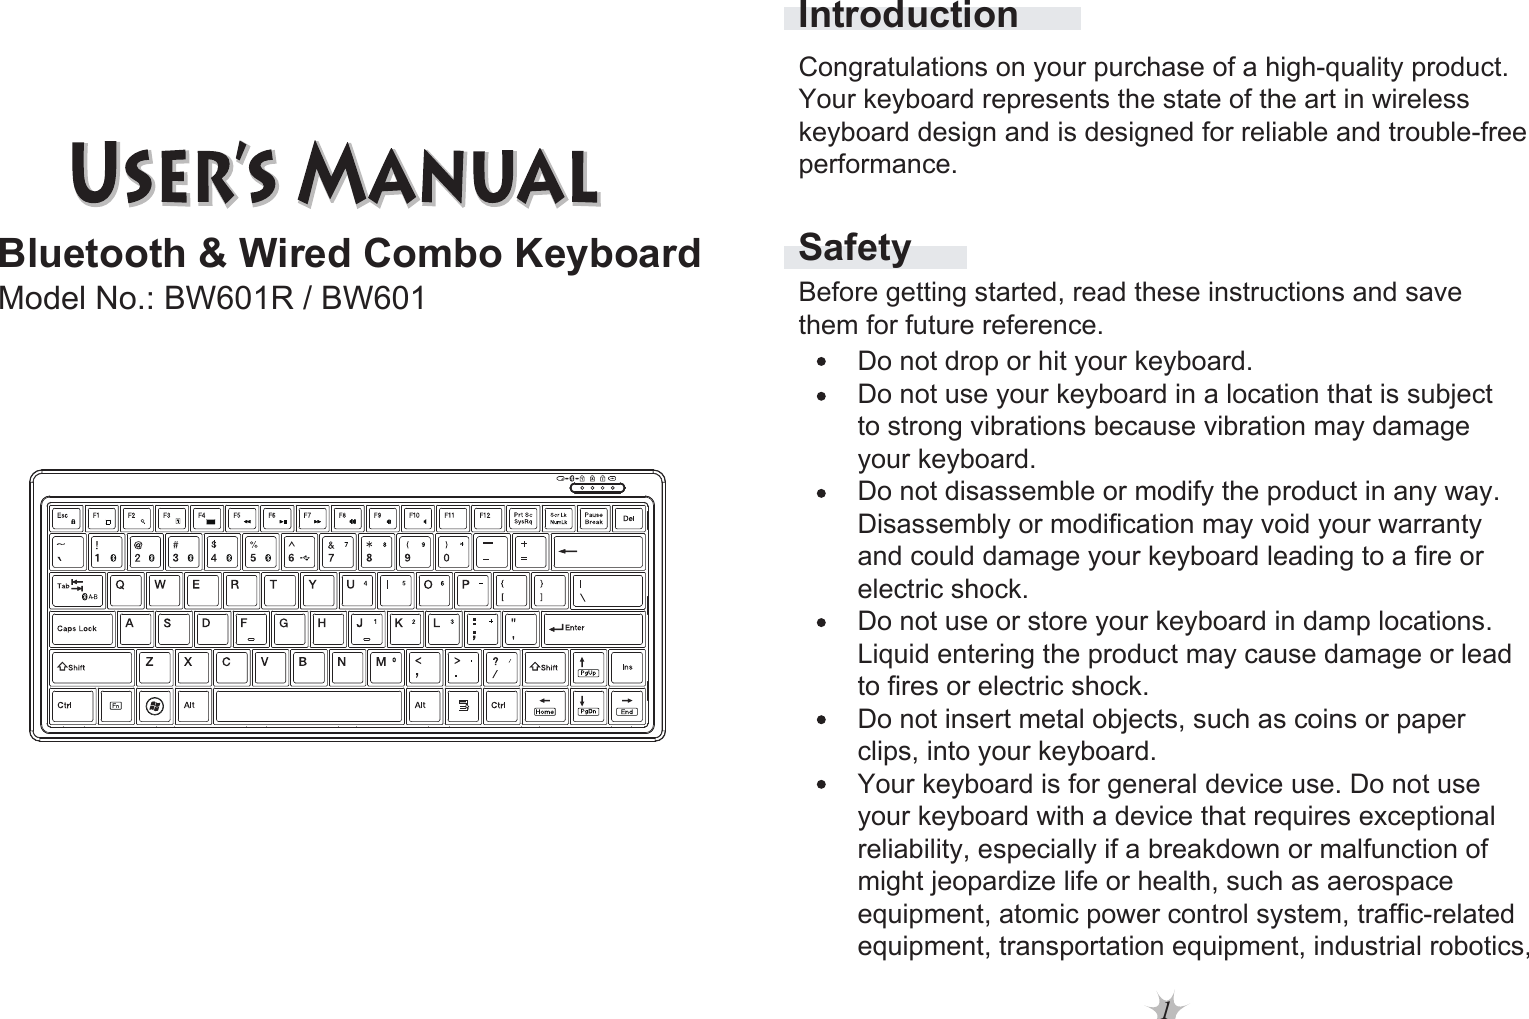 1Bluetooth &amp; Wired Combo KeyboardModel No.: BW601R / BW601SafetyIntroductionBefore getting started, read these instructions and save them for future reference.Do not drop or hit your keyboard. Do not use your keyboard in a location that is subject to strong vibrations because vibration may damage your keyboard. Do not disassemble or modify the product in any way. Disassembly or modification may void your warranty and could damage your keyboard leading to a fire or electric shock. Do not use or store your keyboard in damp locations.Liquid entering the product may cause damage or lead to fires or electric shock. Do not insert metal objects, such as coins or paper clips, into your keyboard. Your keyboard is for general device use. Do not use your keyboard with a device that requires exceptional reliability, especially if a breakdown or malfunction of might jeopardize life or health, such as aerospace equipment, atomic power control system, traffic-relatedequipment, transportation equipment, industrial robotics,Congratulations on your purchase of a high-quality product. Your keyboard represents the state of the art in wireless keyboard design and is designed for reliable and trouble-free performance. 